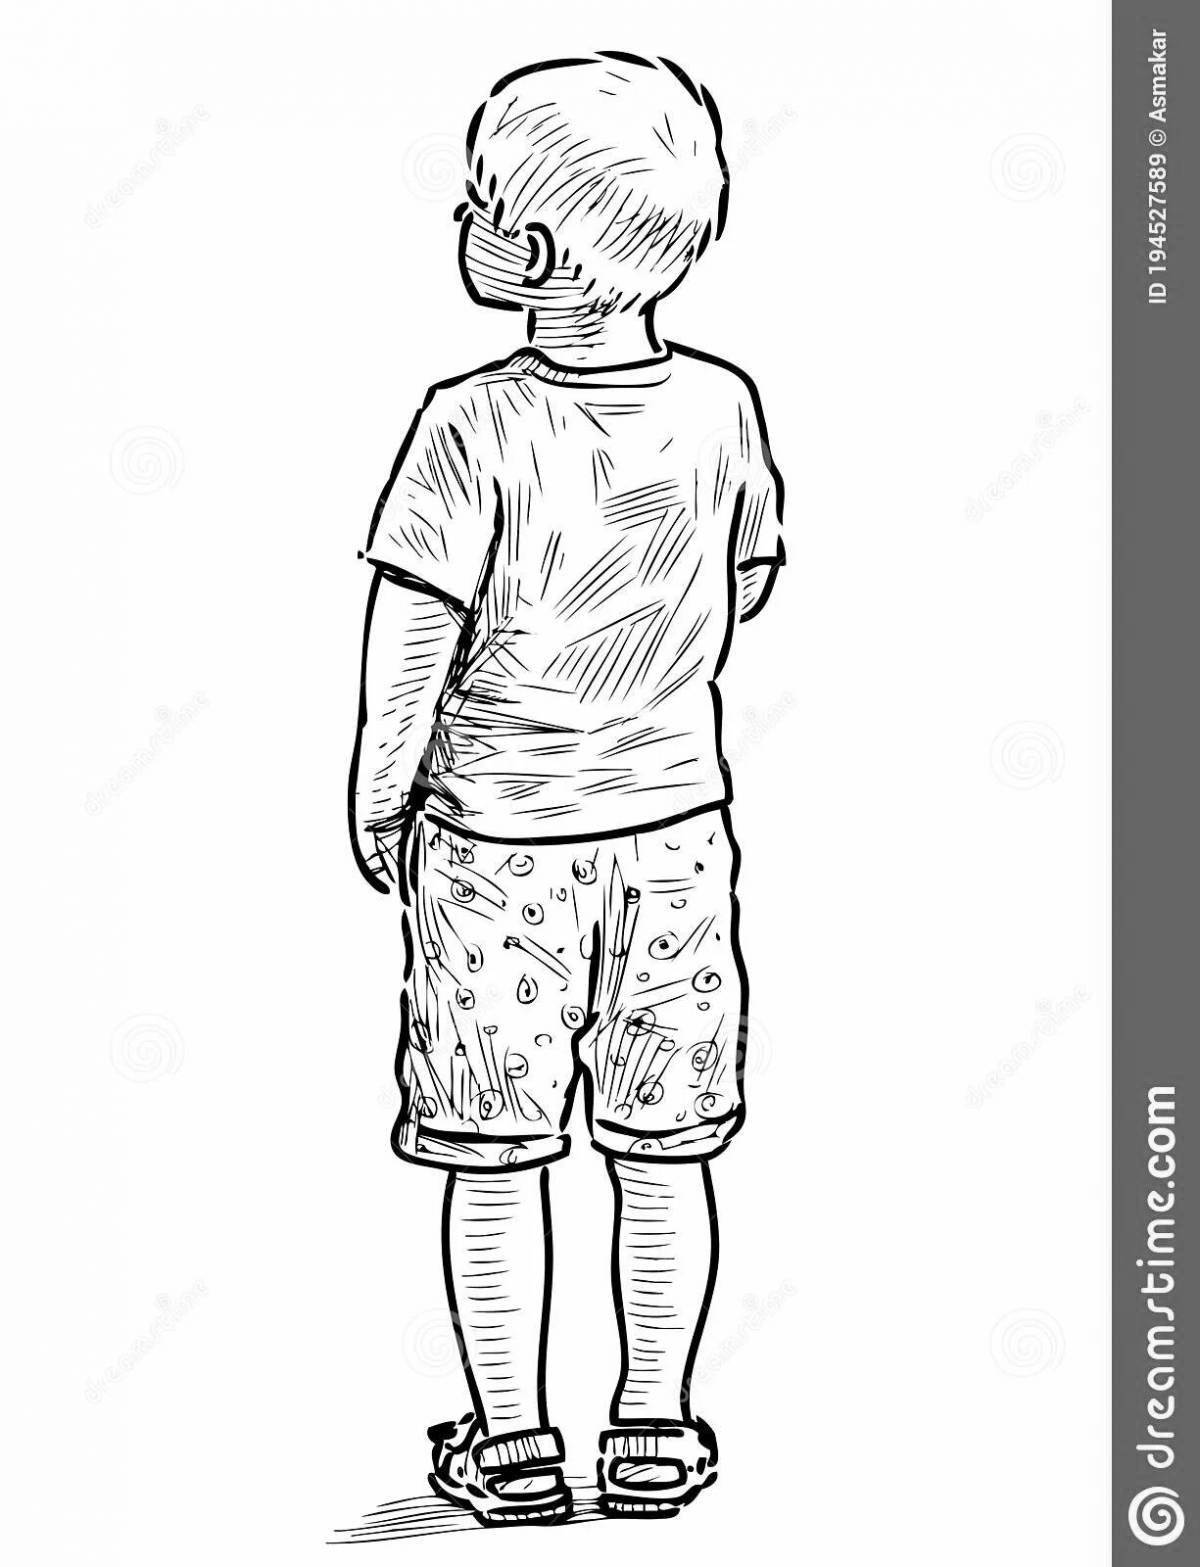 Live coloring of a standing boy